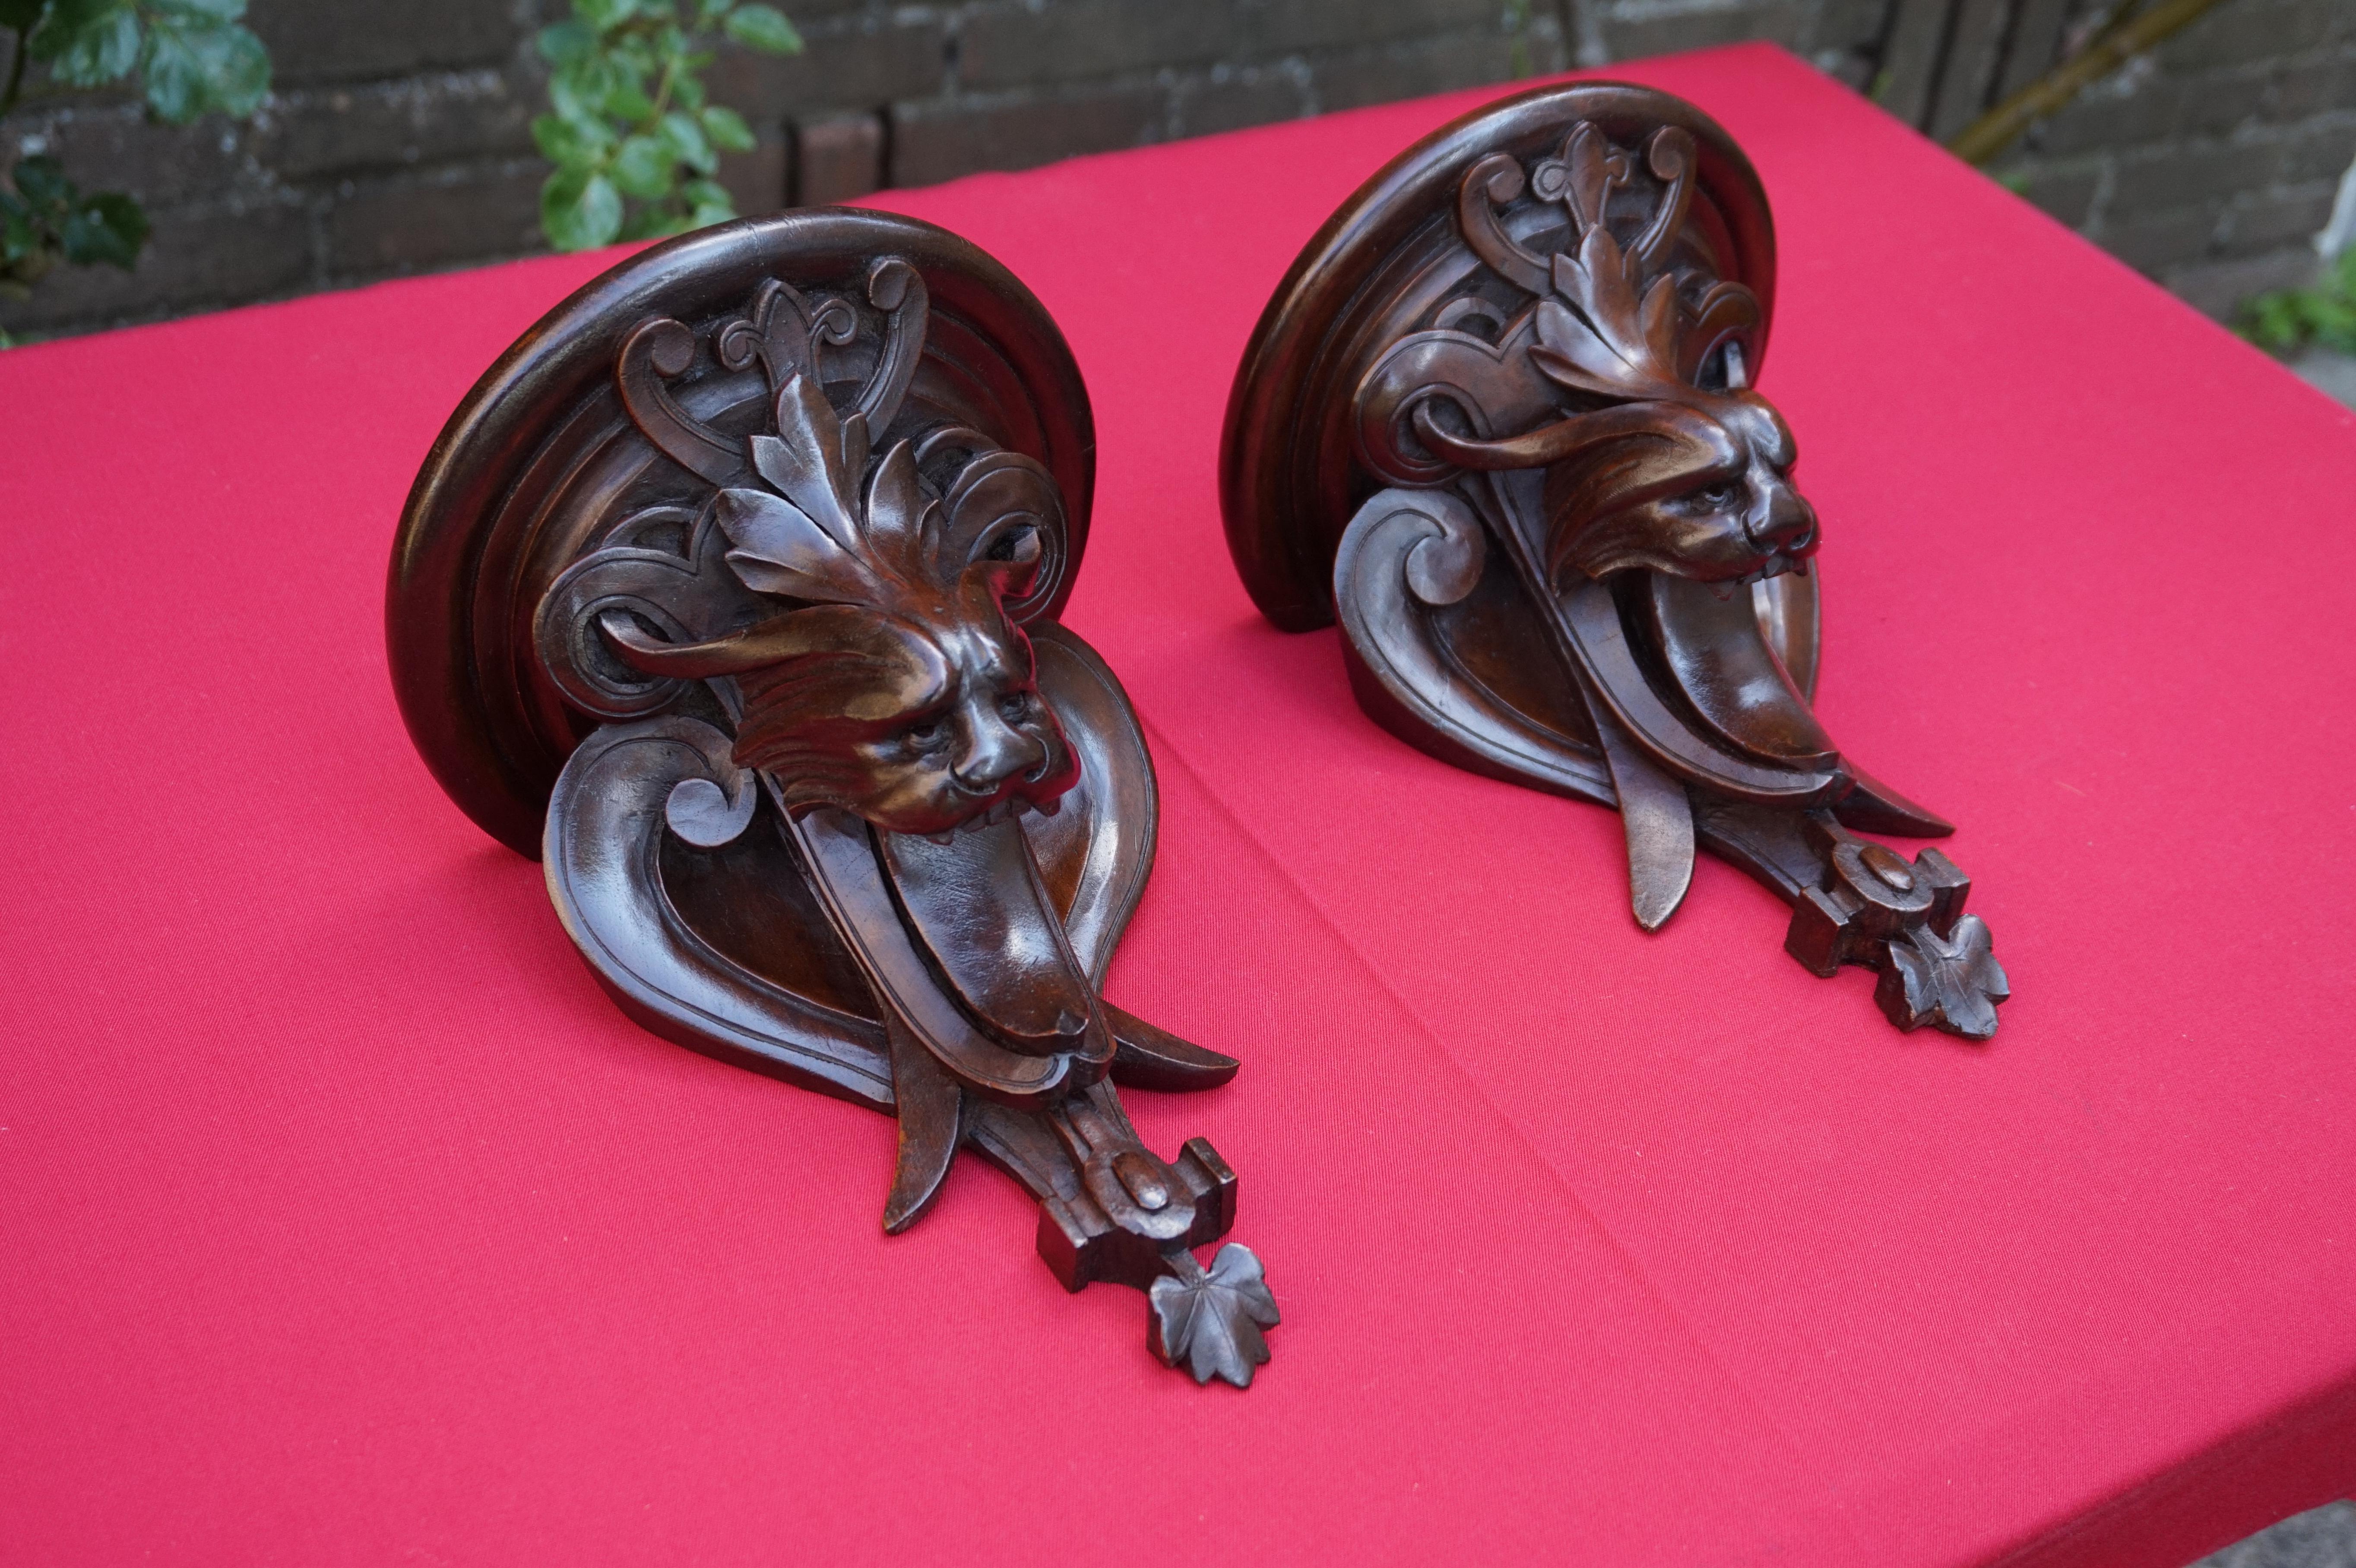 19th Century Rare and Antique Pair of Hand Carved Renaissance Revival Grotesque Wall Brackets For Sale